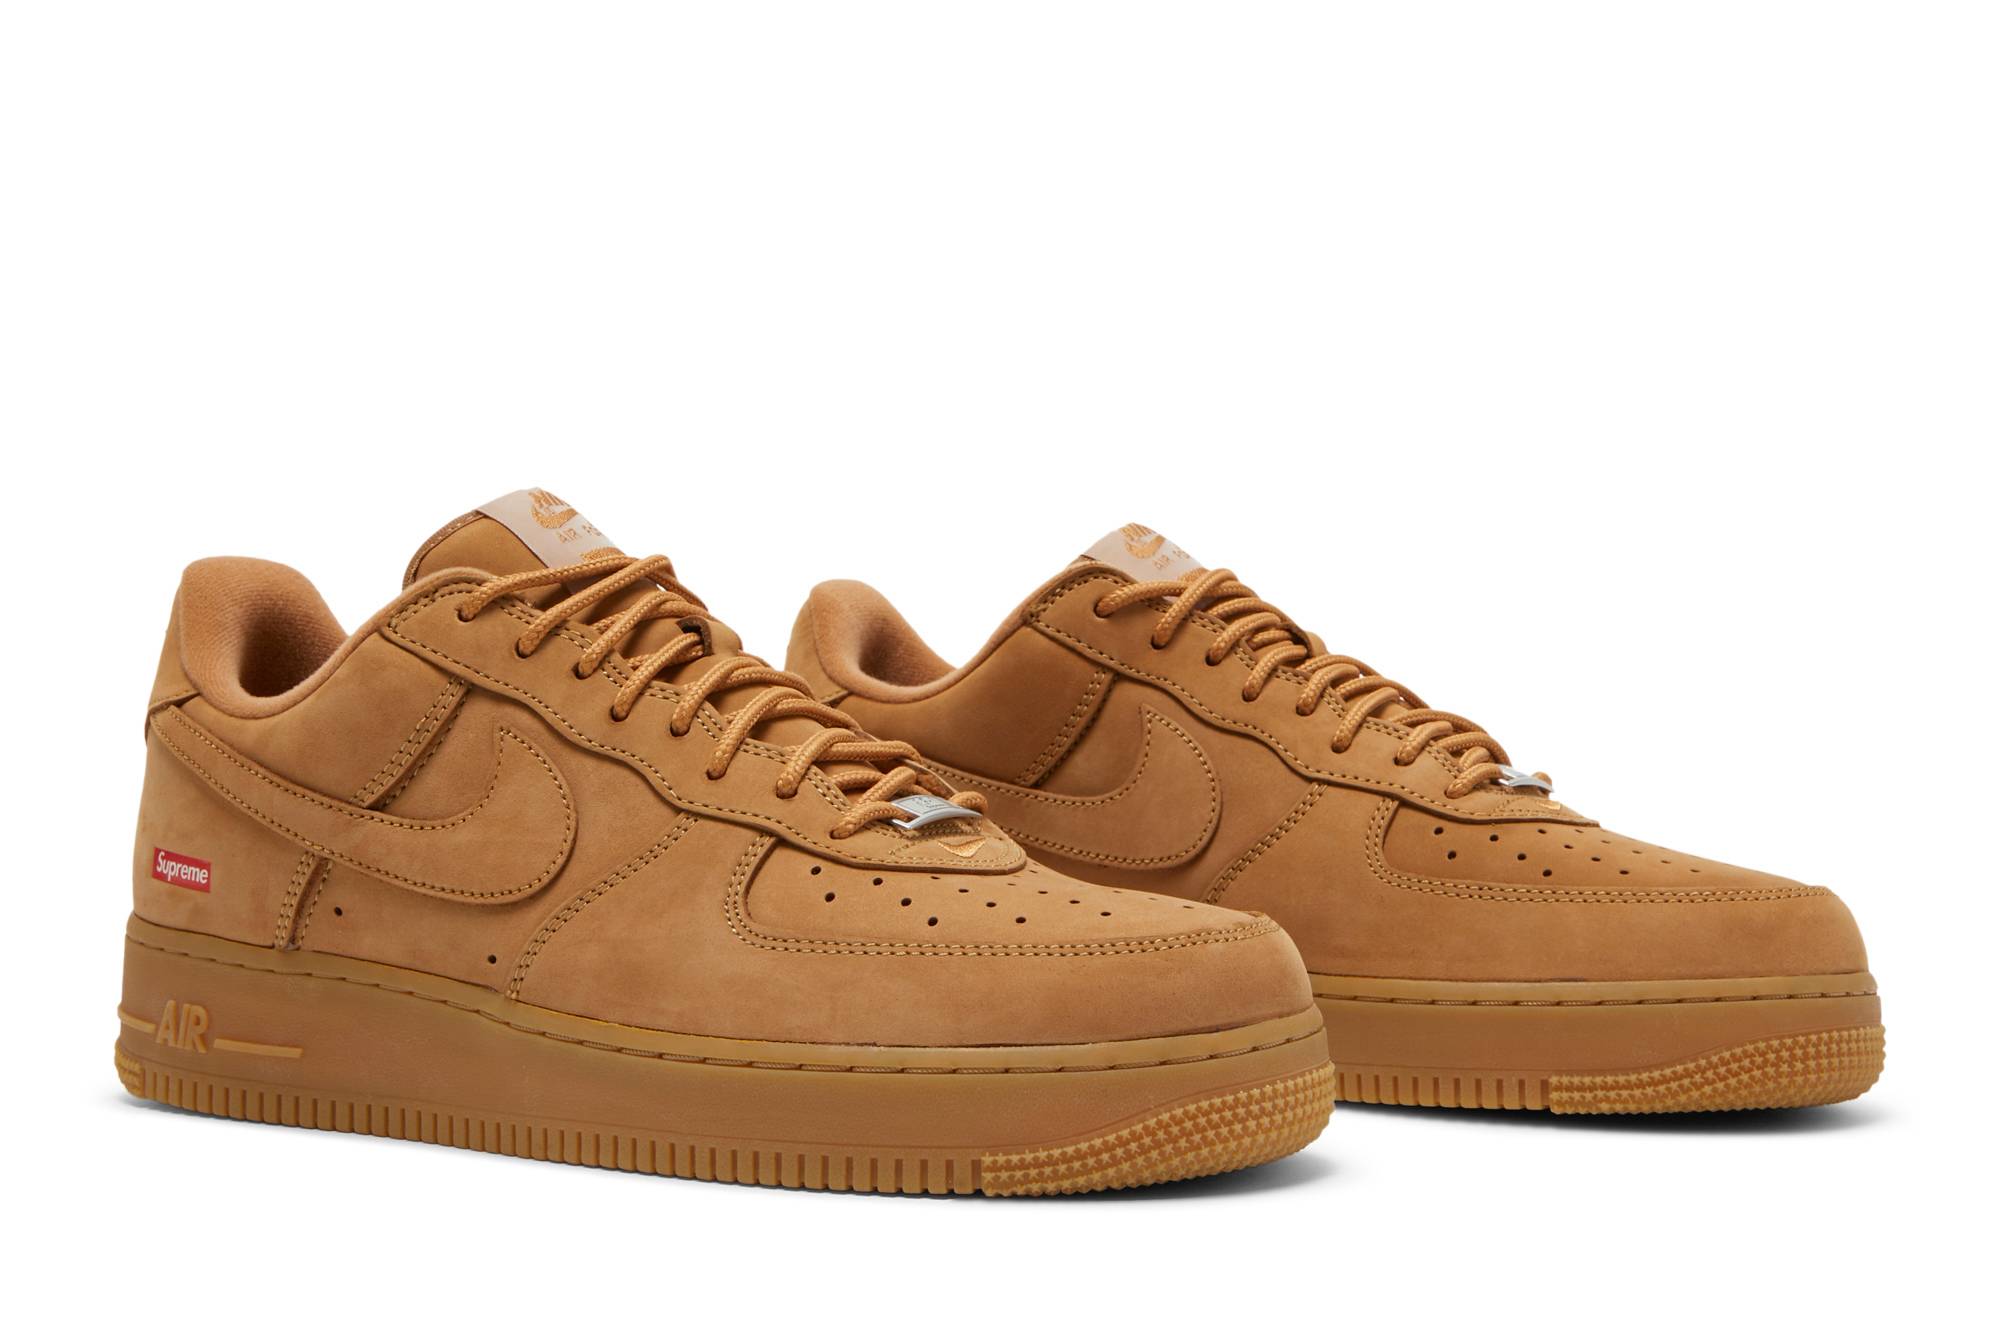 Supreme x Nike Air Force 1 Low SP 'Wheat' DN1555-200